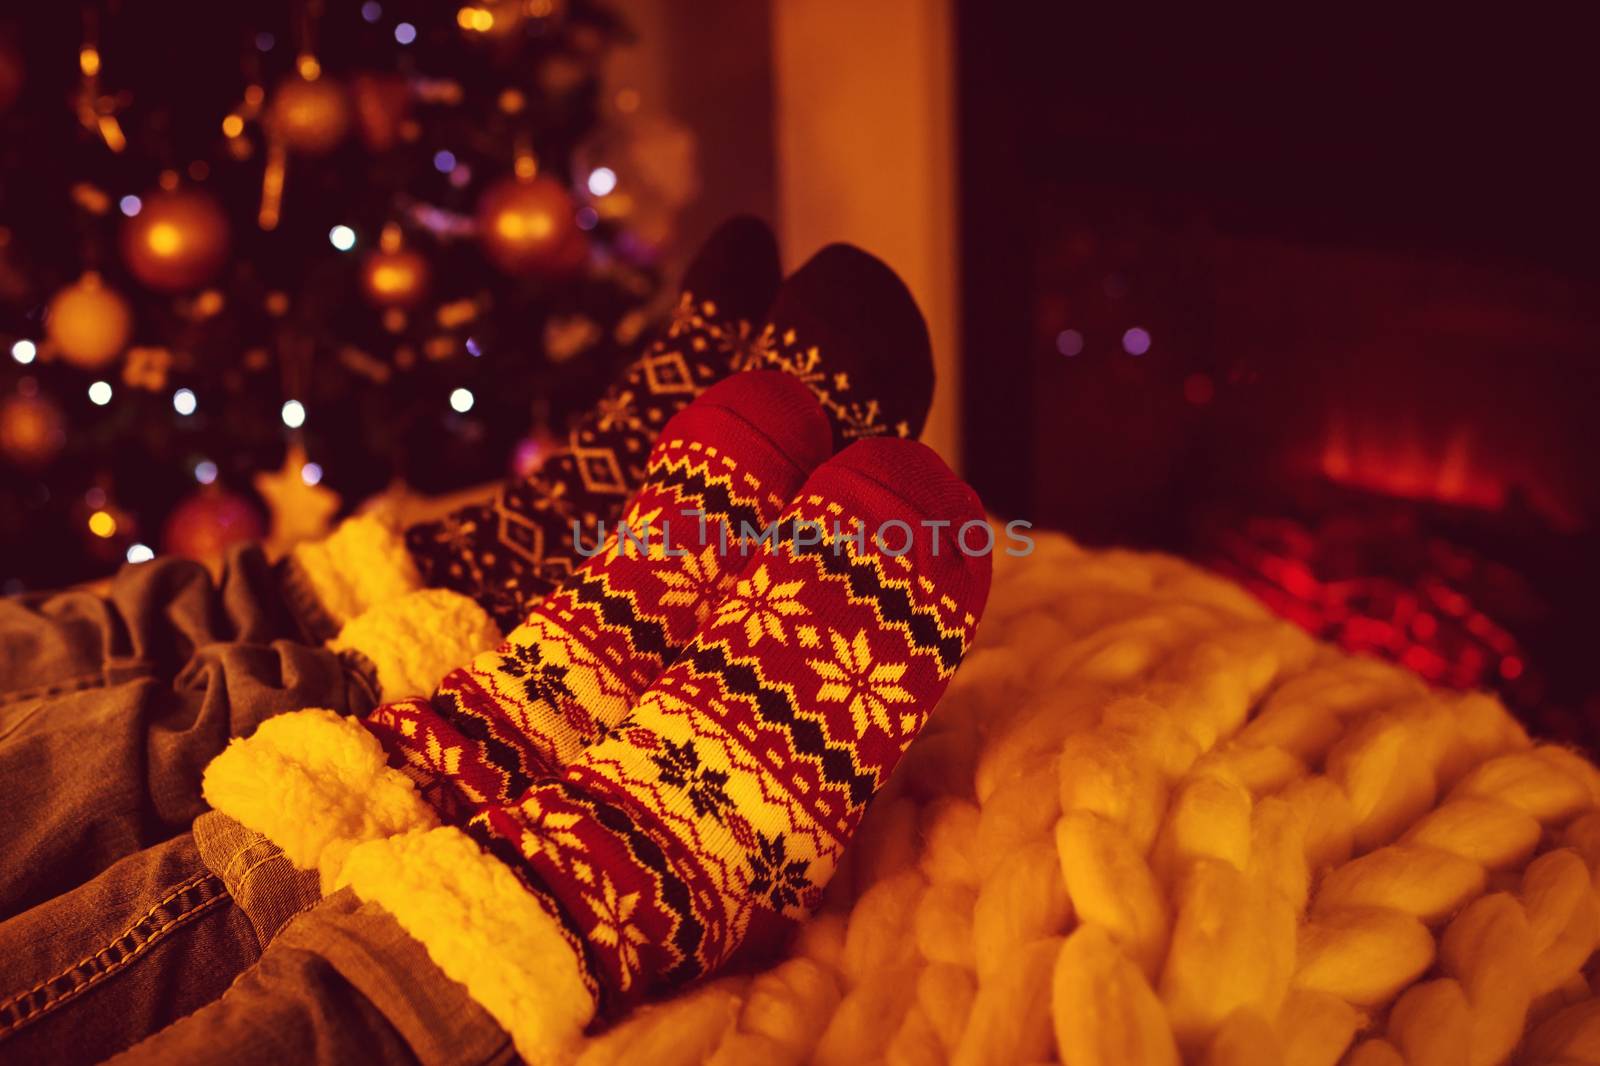 Couple sitting in woolen socks near fireplace in living room decorated for Christmas holidays